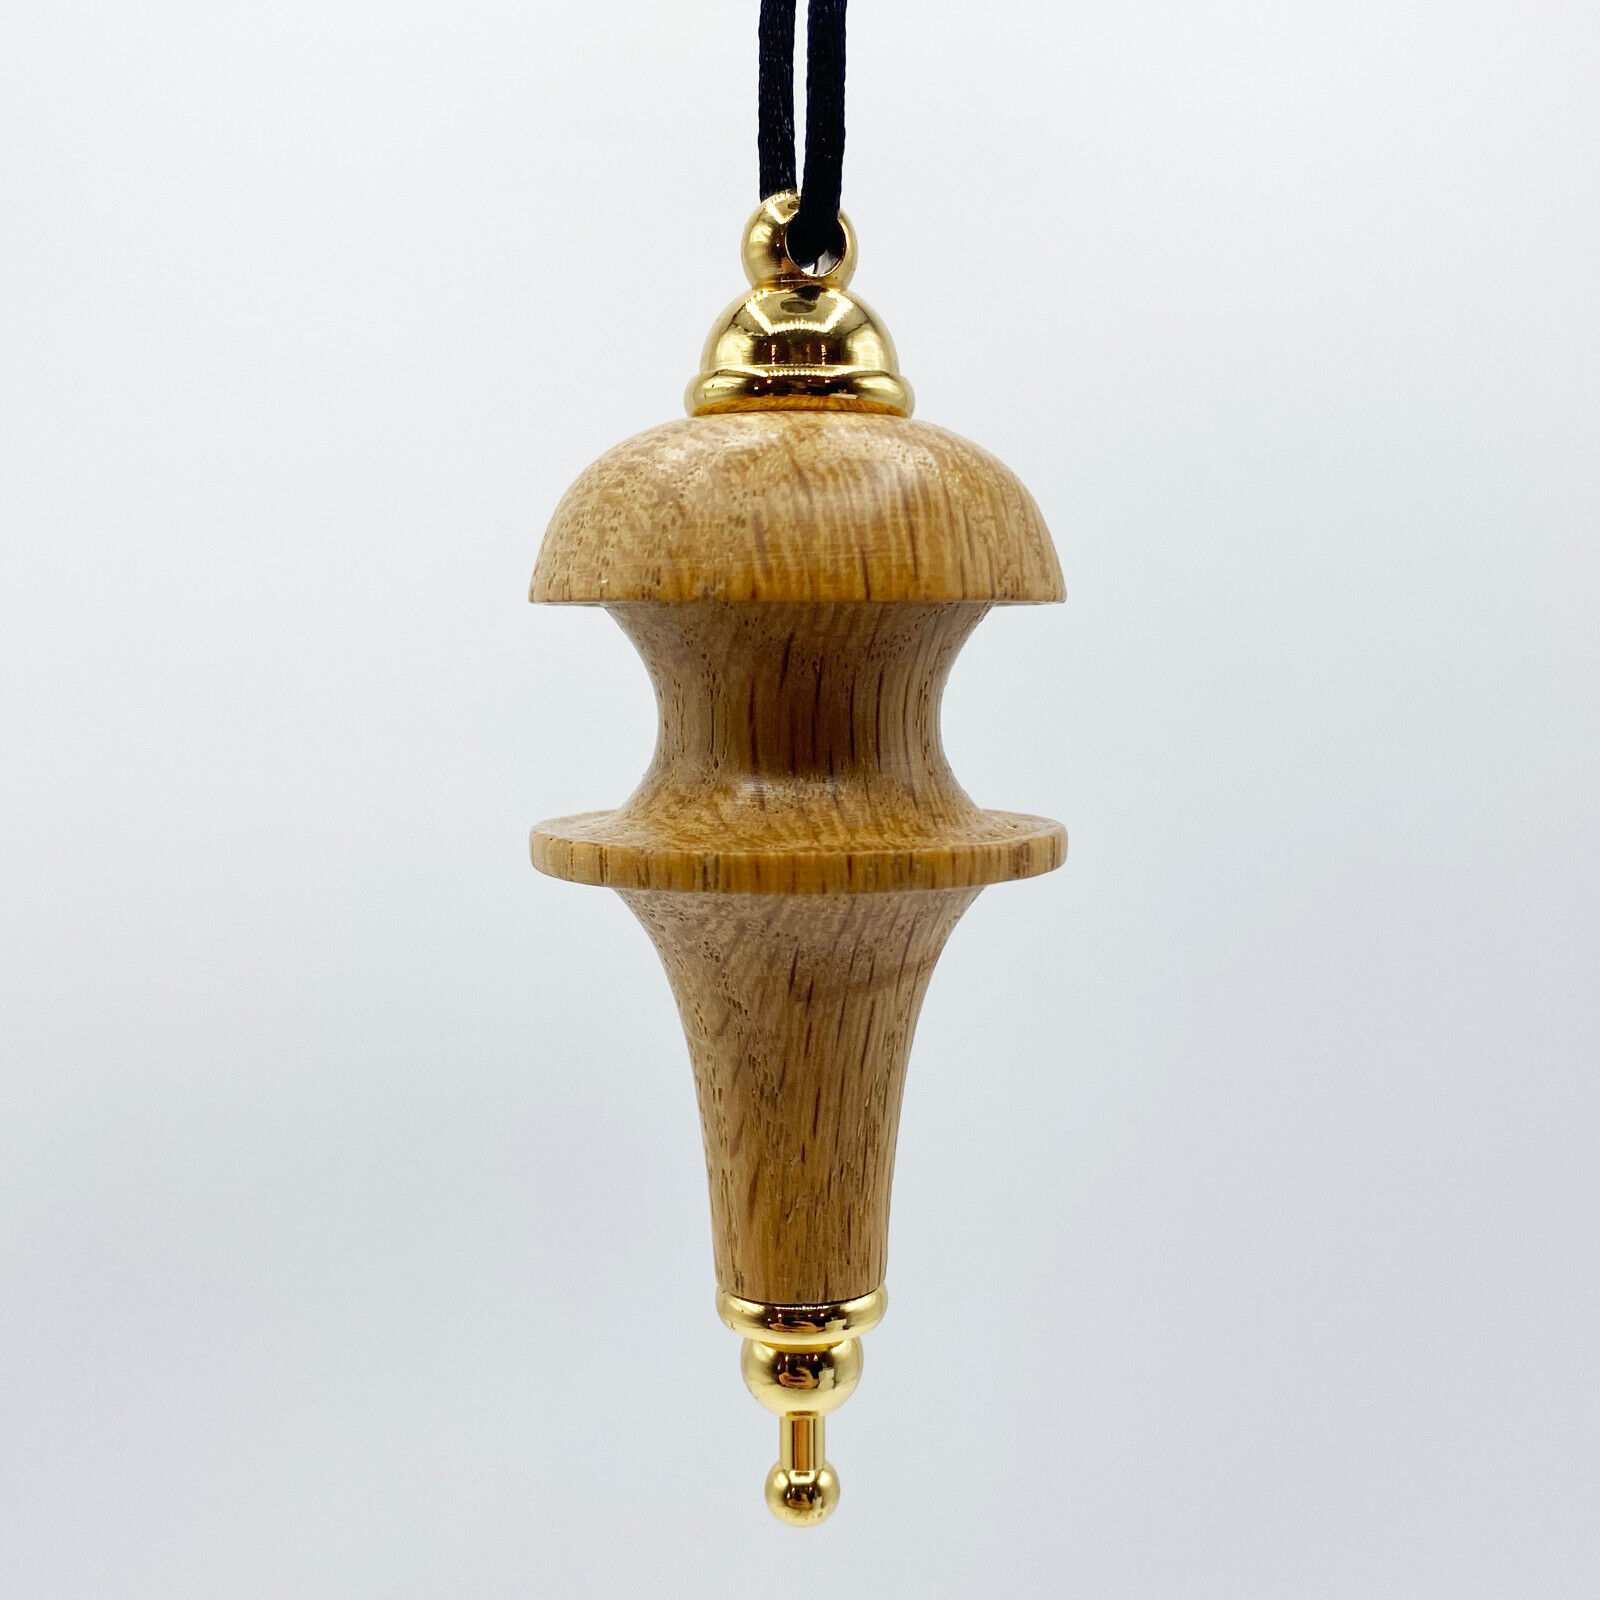 Unique Handmade Turned Oak Wood Ornament with Gold Tone Metal Accents